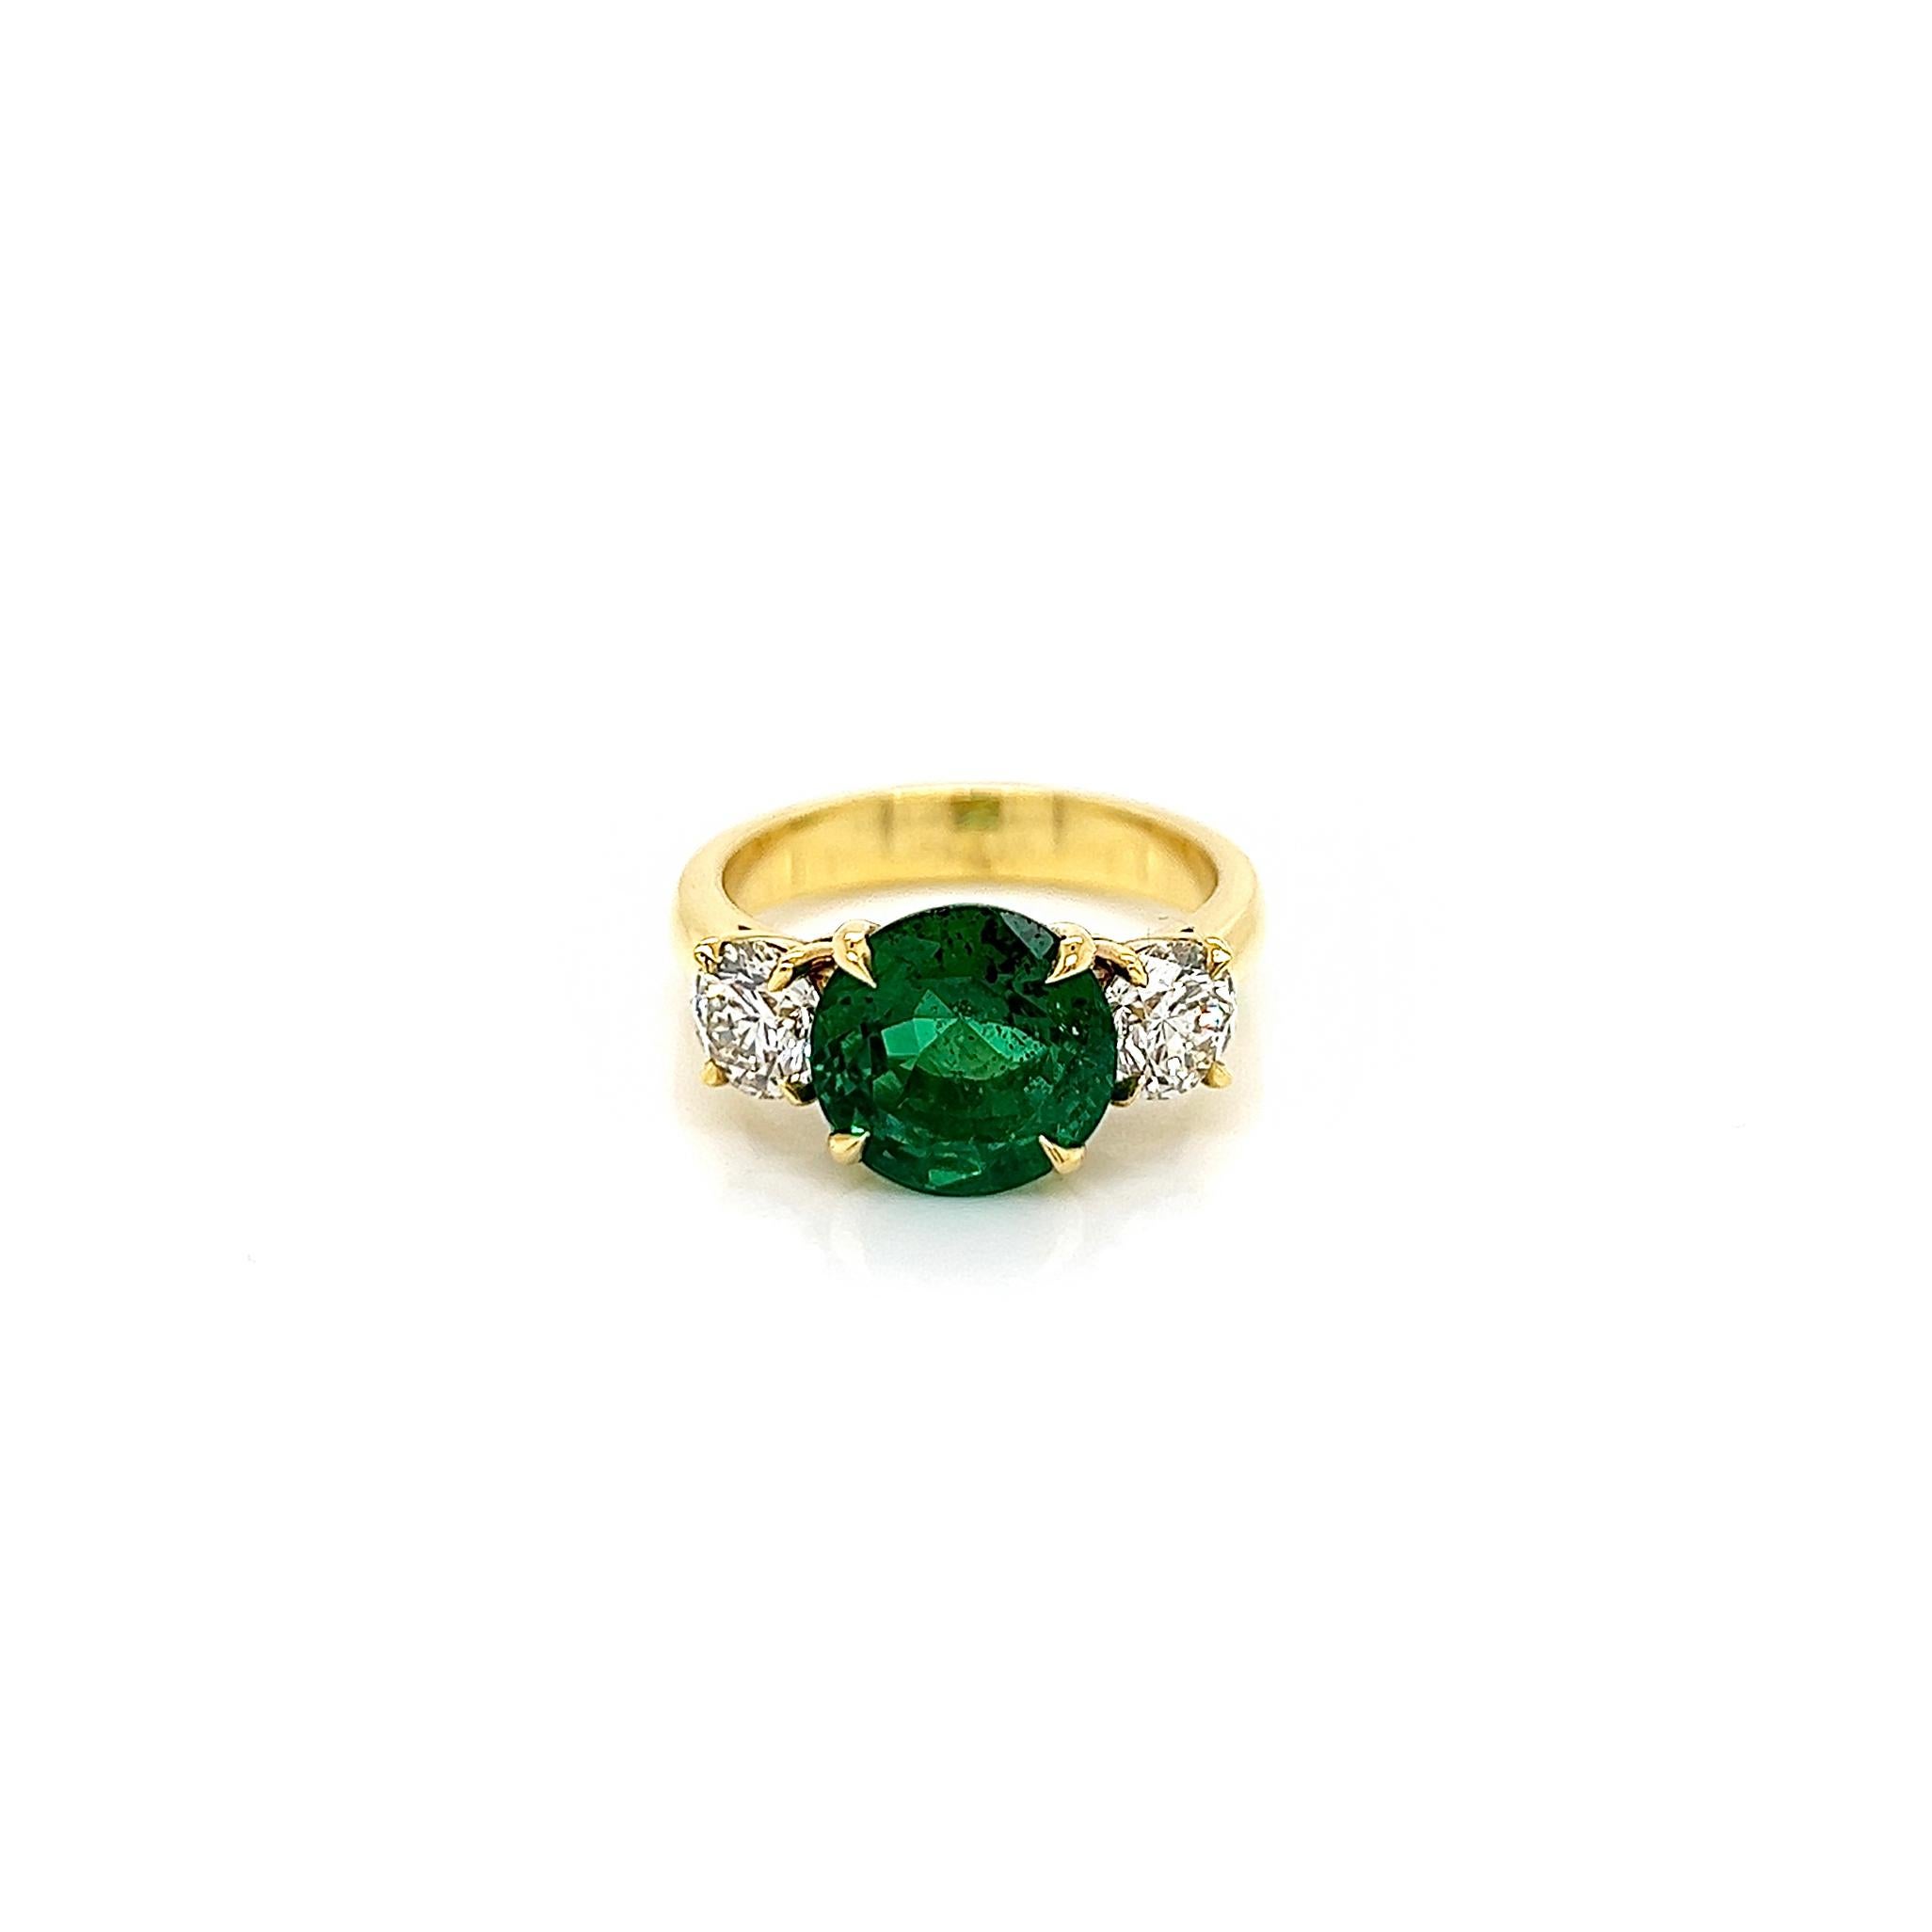 3.97 Total Carat Emerald and Diamond Three Stone Ladies Ring, GIA Certified.

-Metal Type: 18K Yellow Gold
-2.95 Carat Round Cut Natural Colombian Beryl Emerald, GIA Certified 
-Emerald Color: Green
-Emerald Measurements: 9.58 x 9.43 x 5.80 mm
-1.02